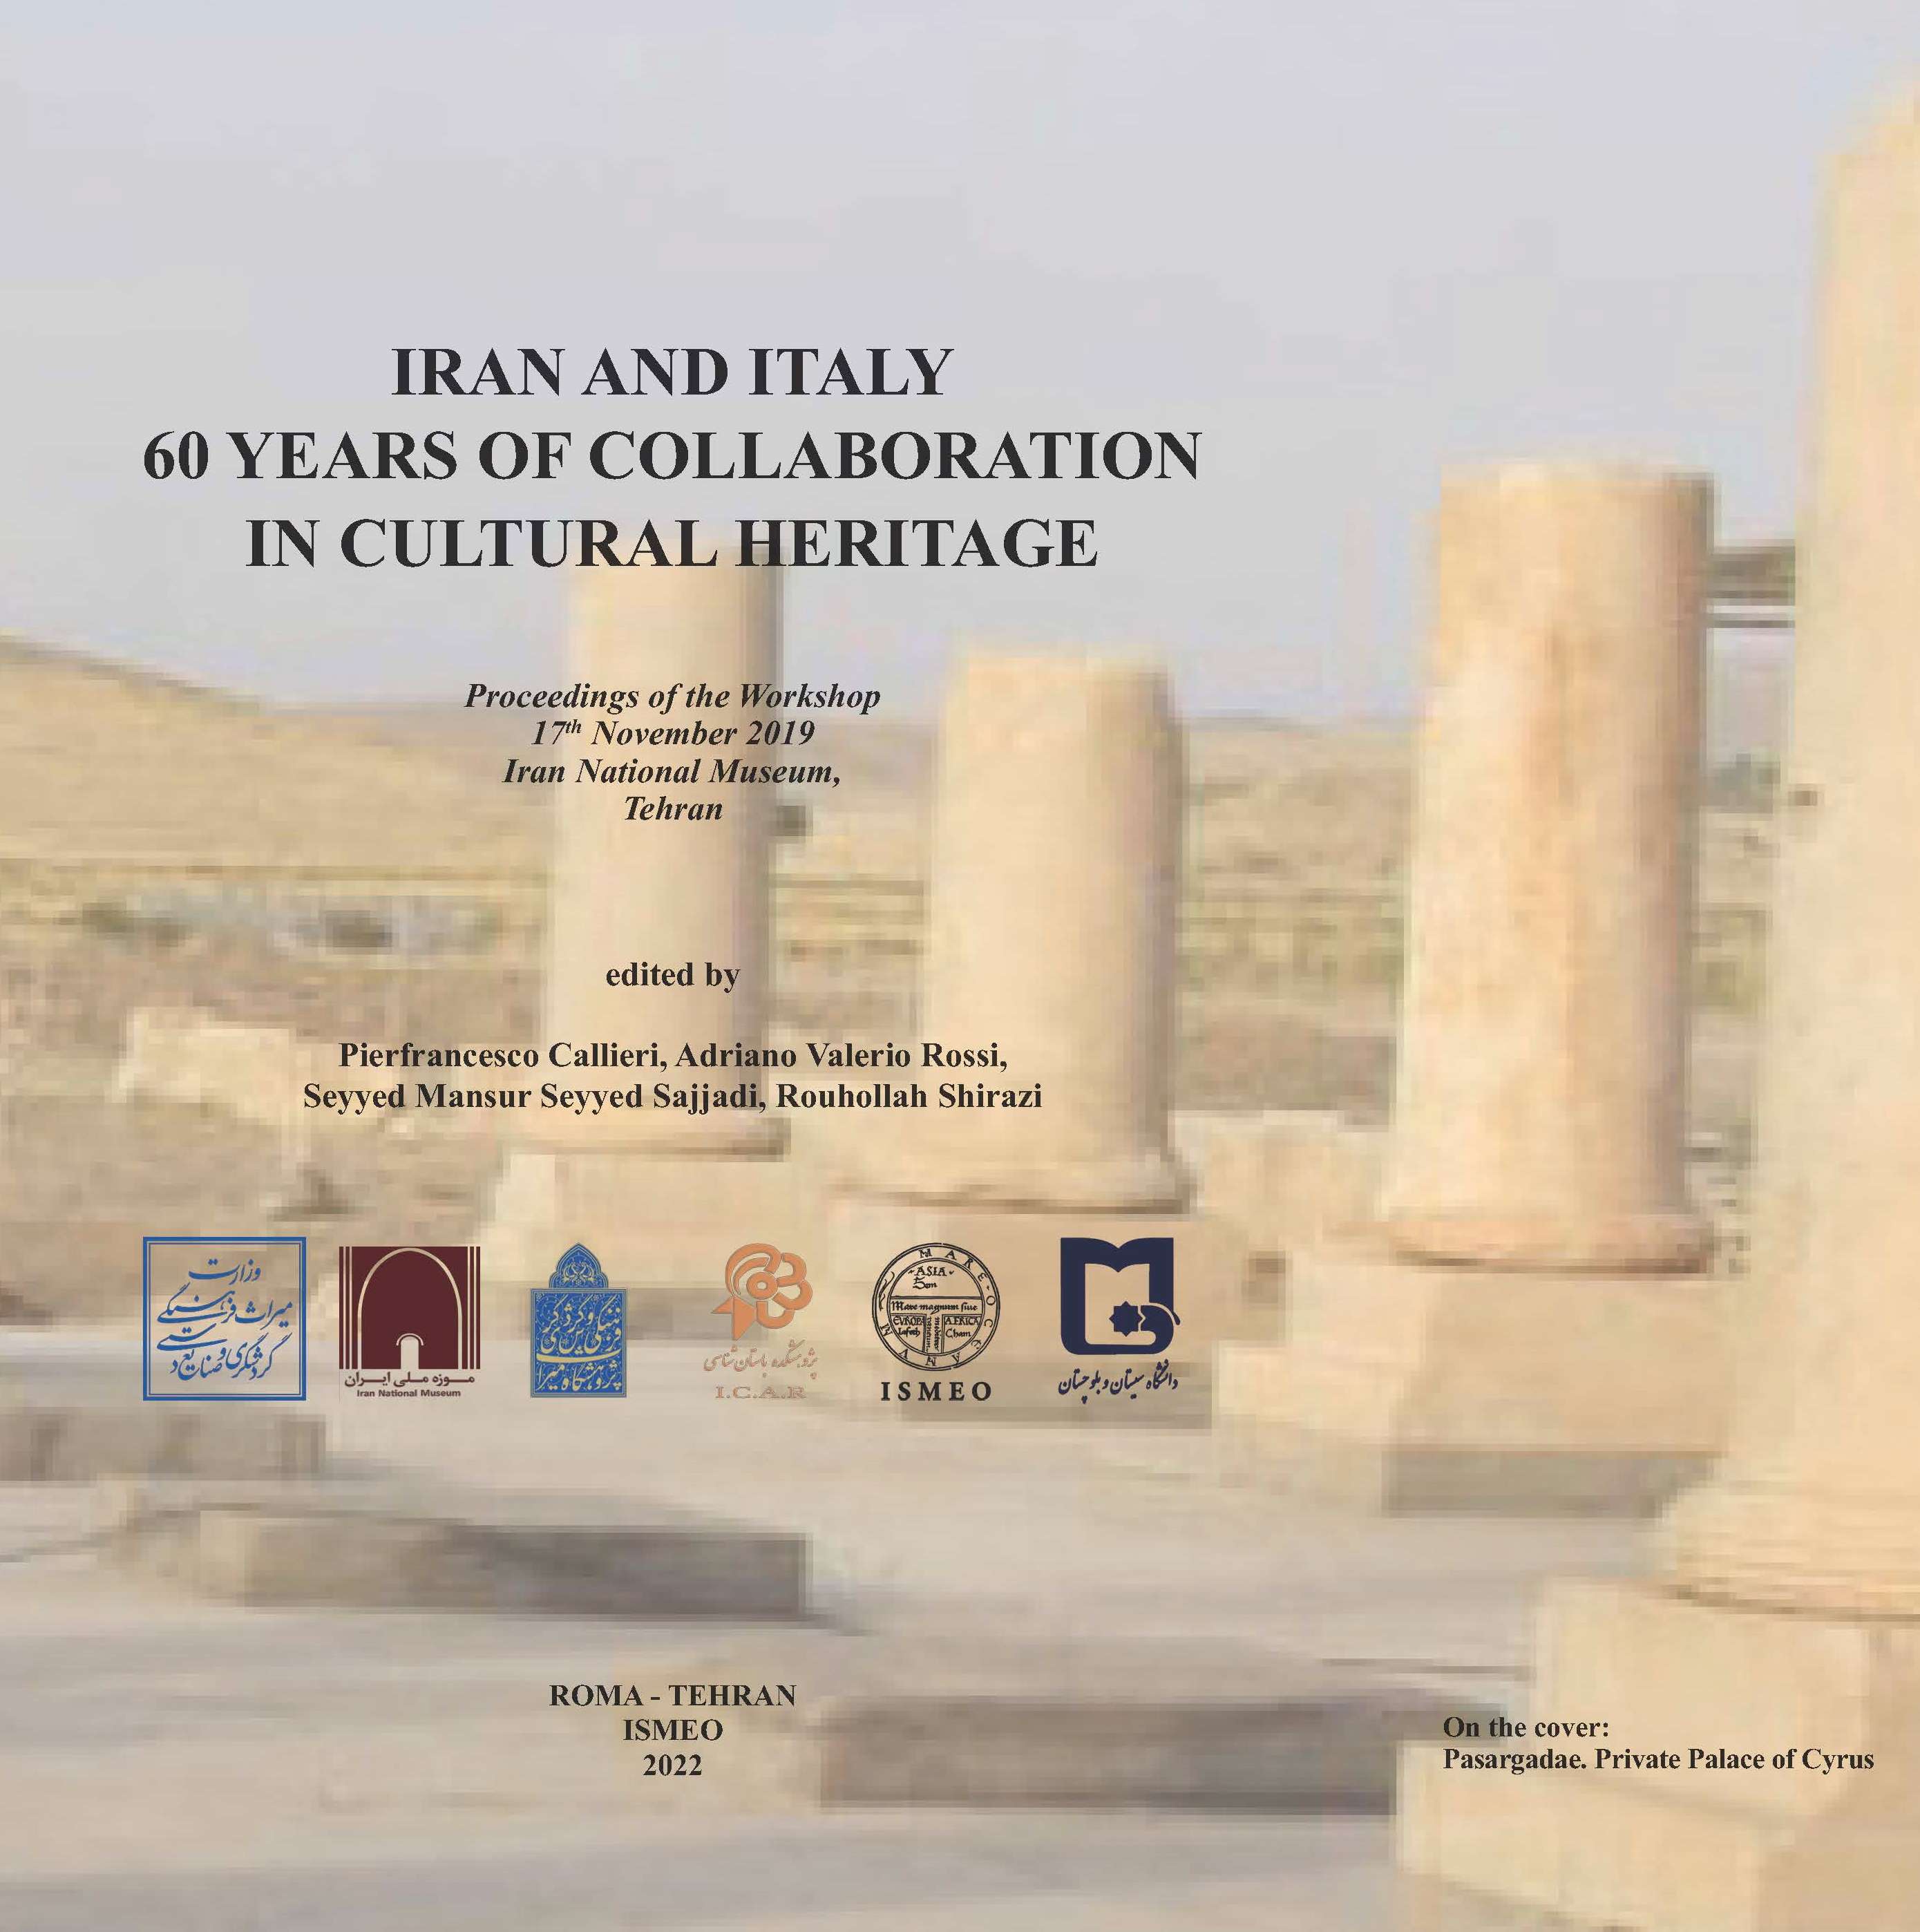 IRAN AND ITALY
60 YEARS OF COLLABORATION IN CULTURAL HERITAGE<br/>
Proceedings of the Workshop
17th November 2019 Iran National Museum, Tehran

